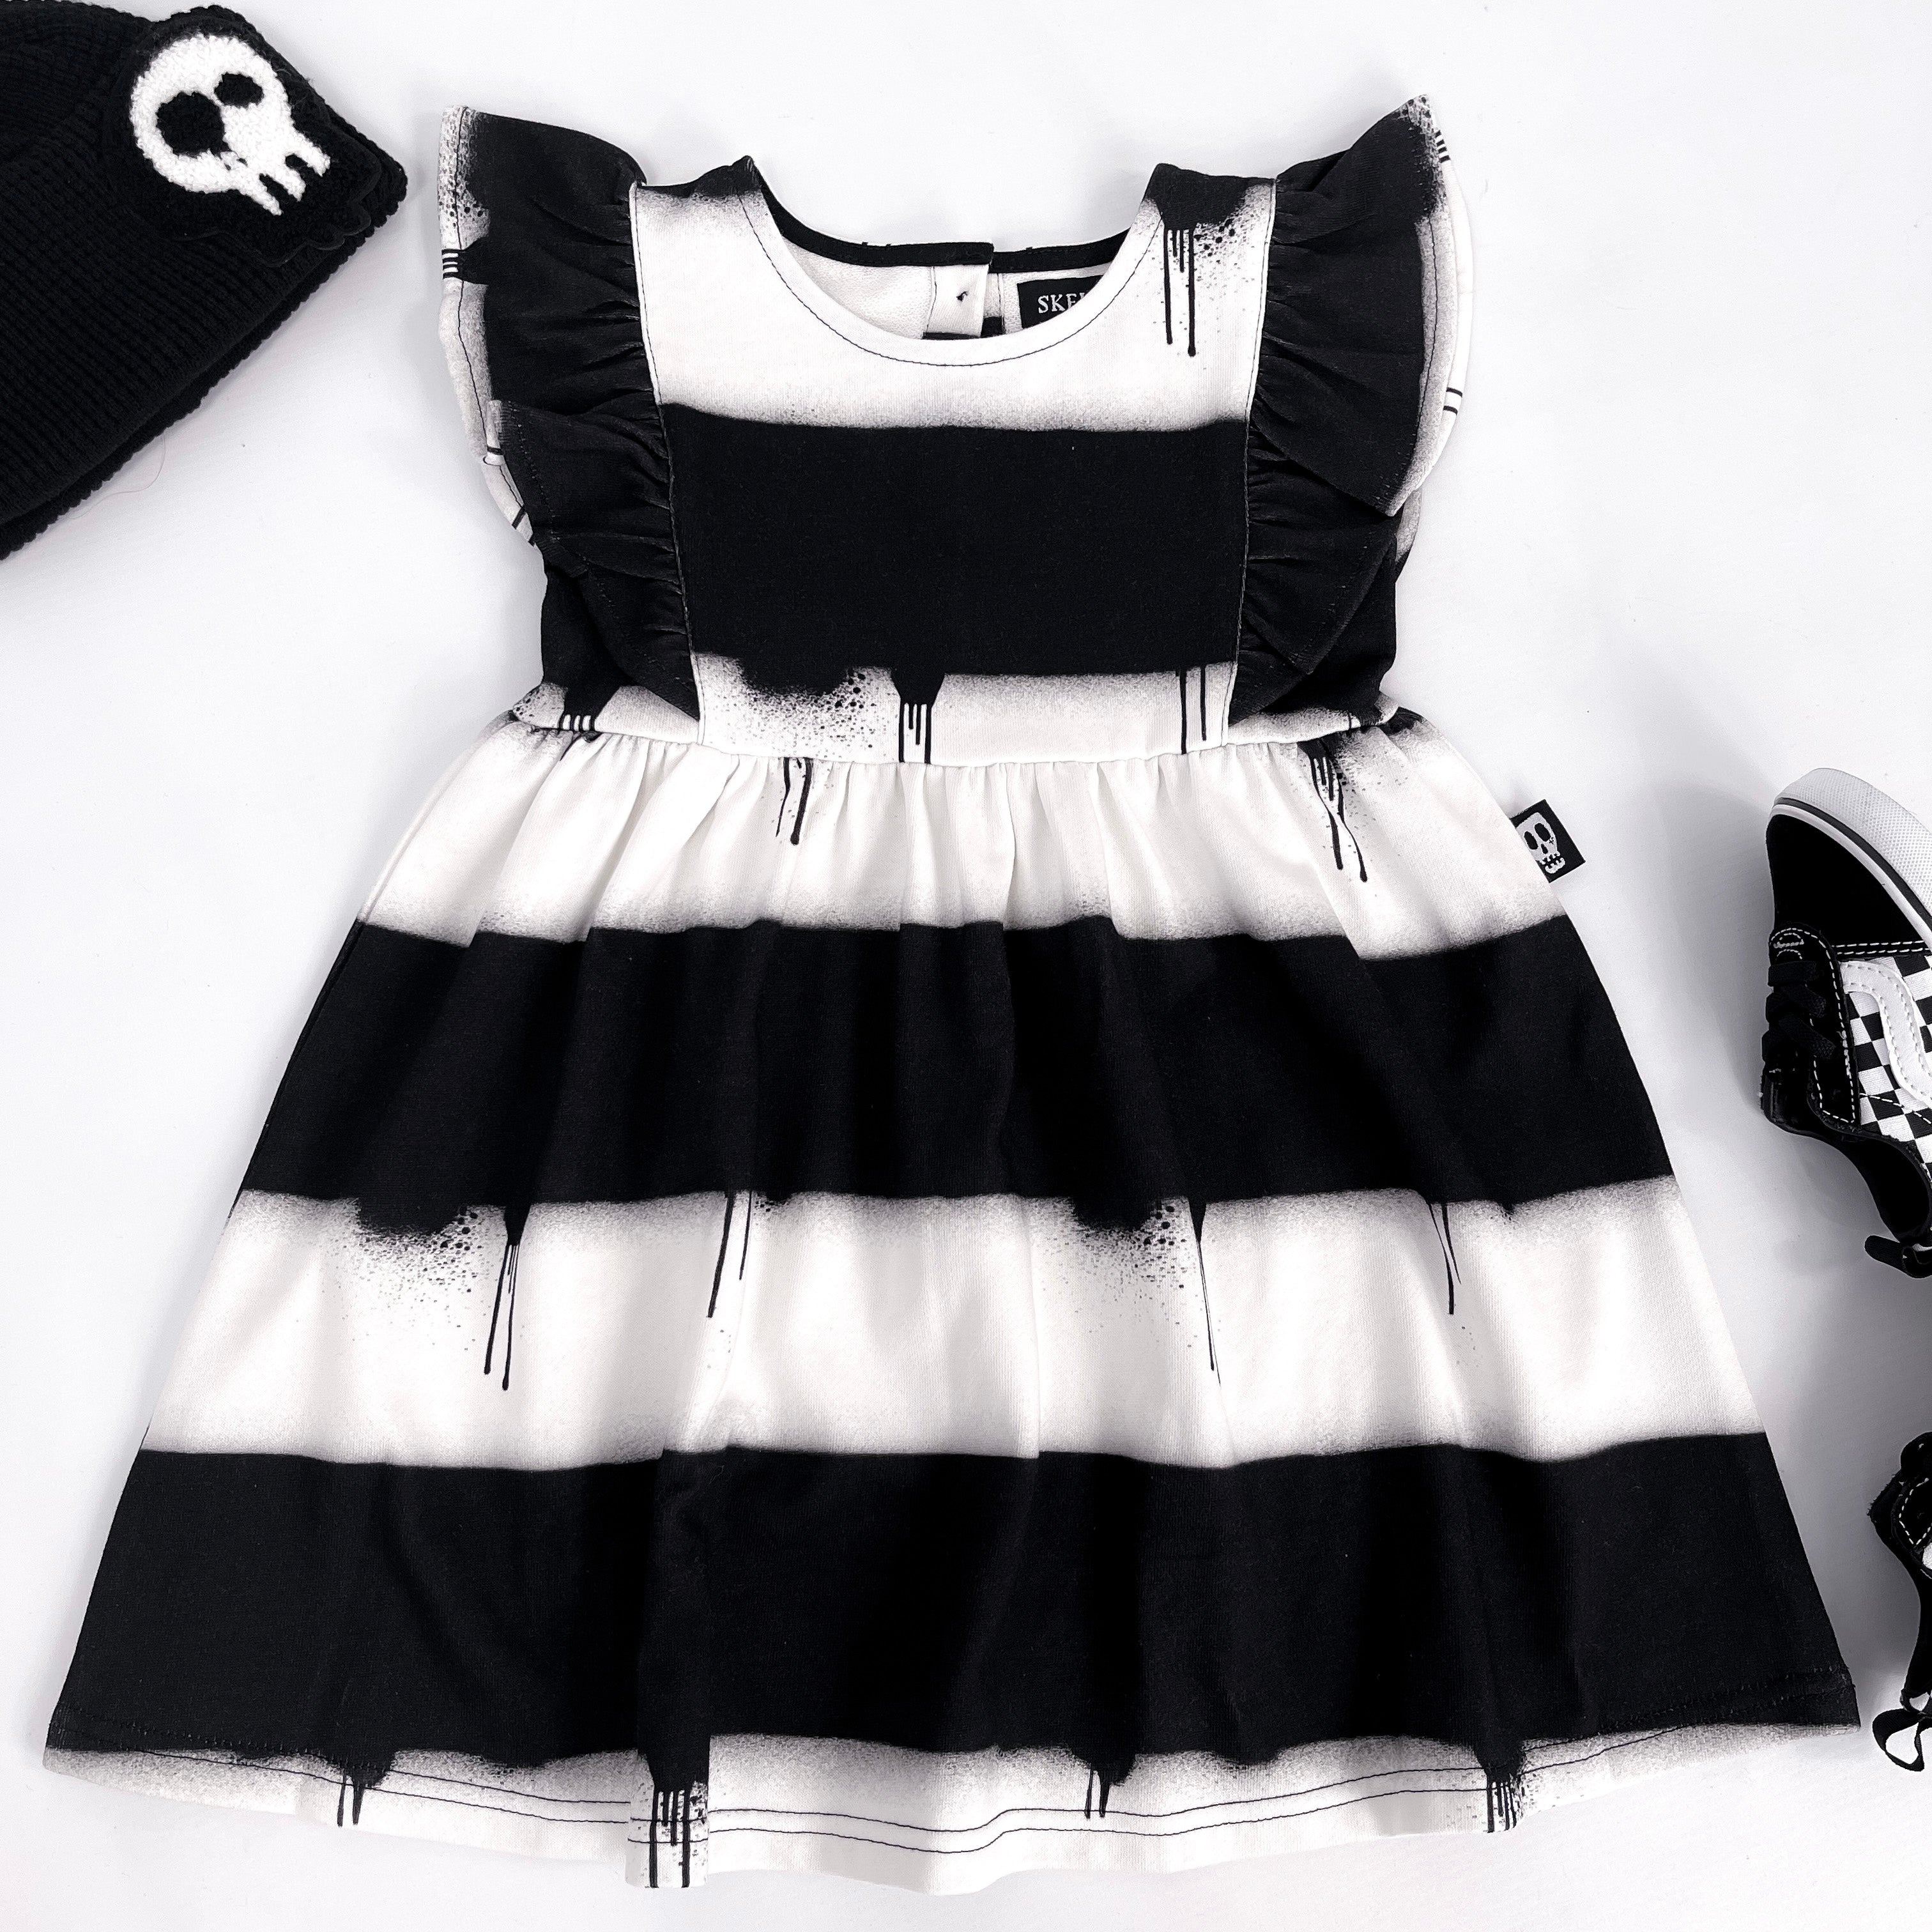 Girls Dress - Black & White Striped with Frill Sleeves & Drip Effect